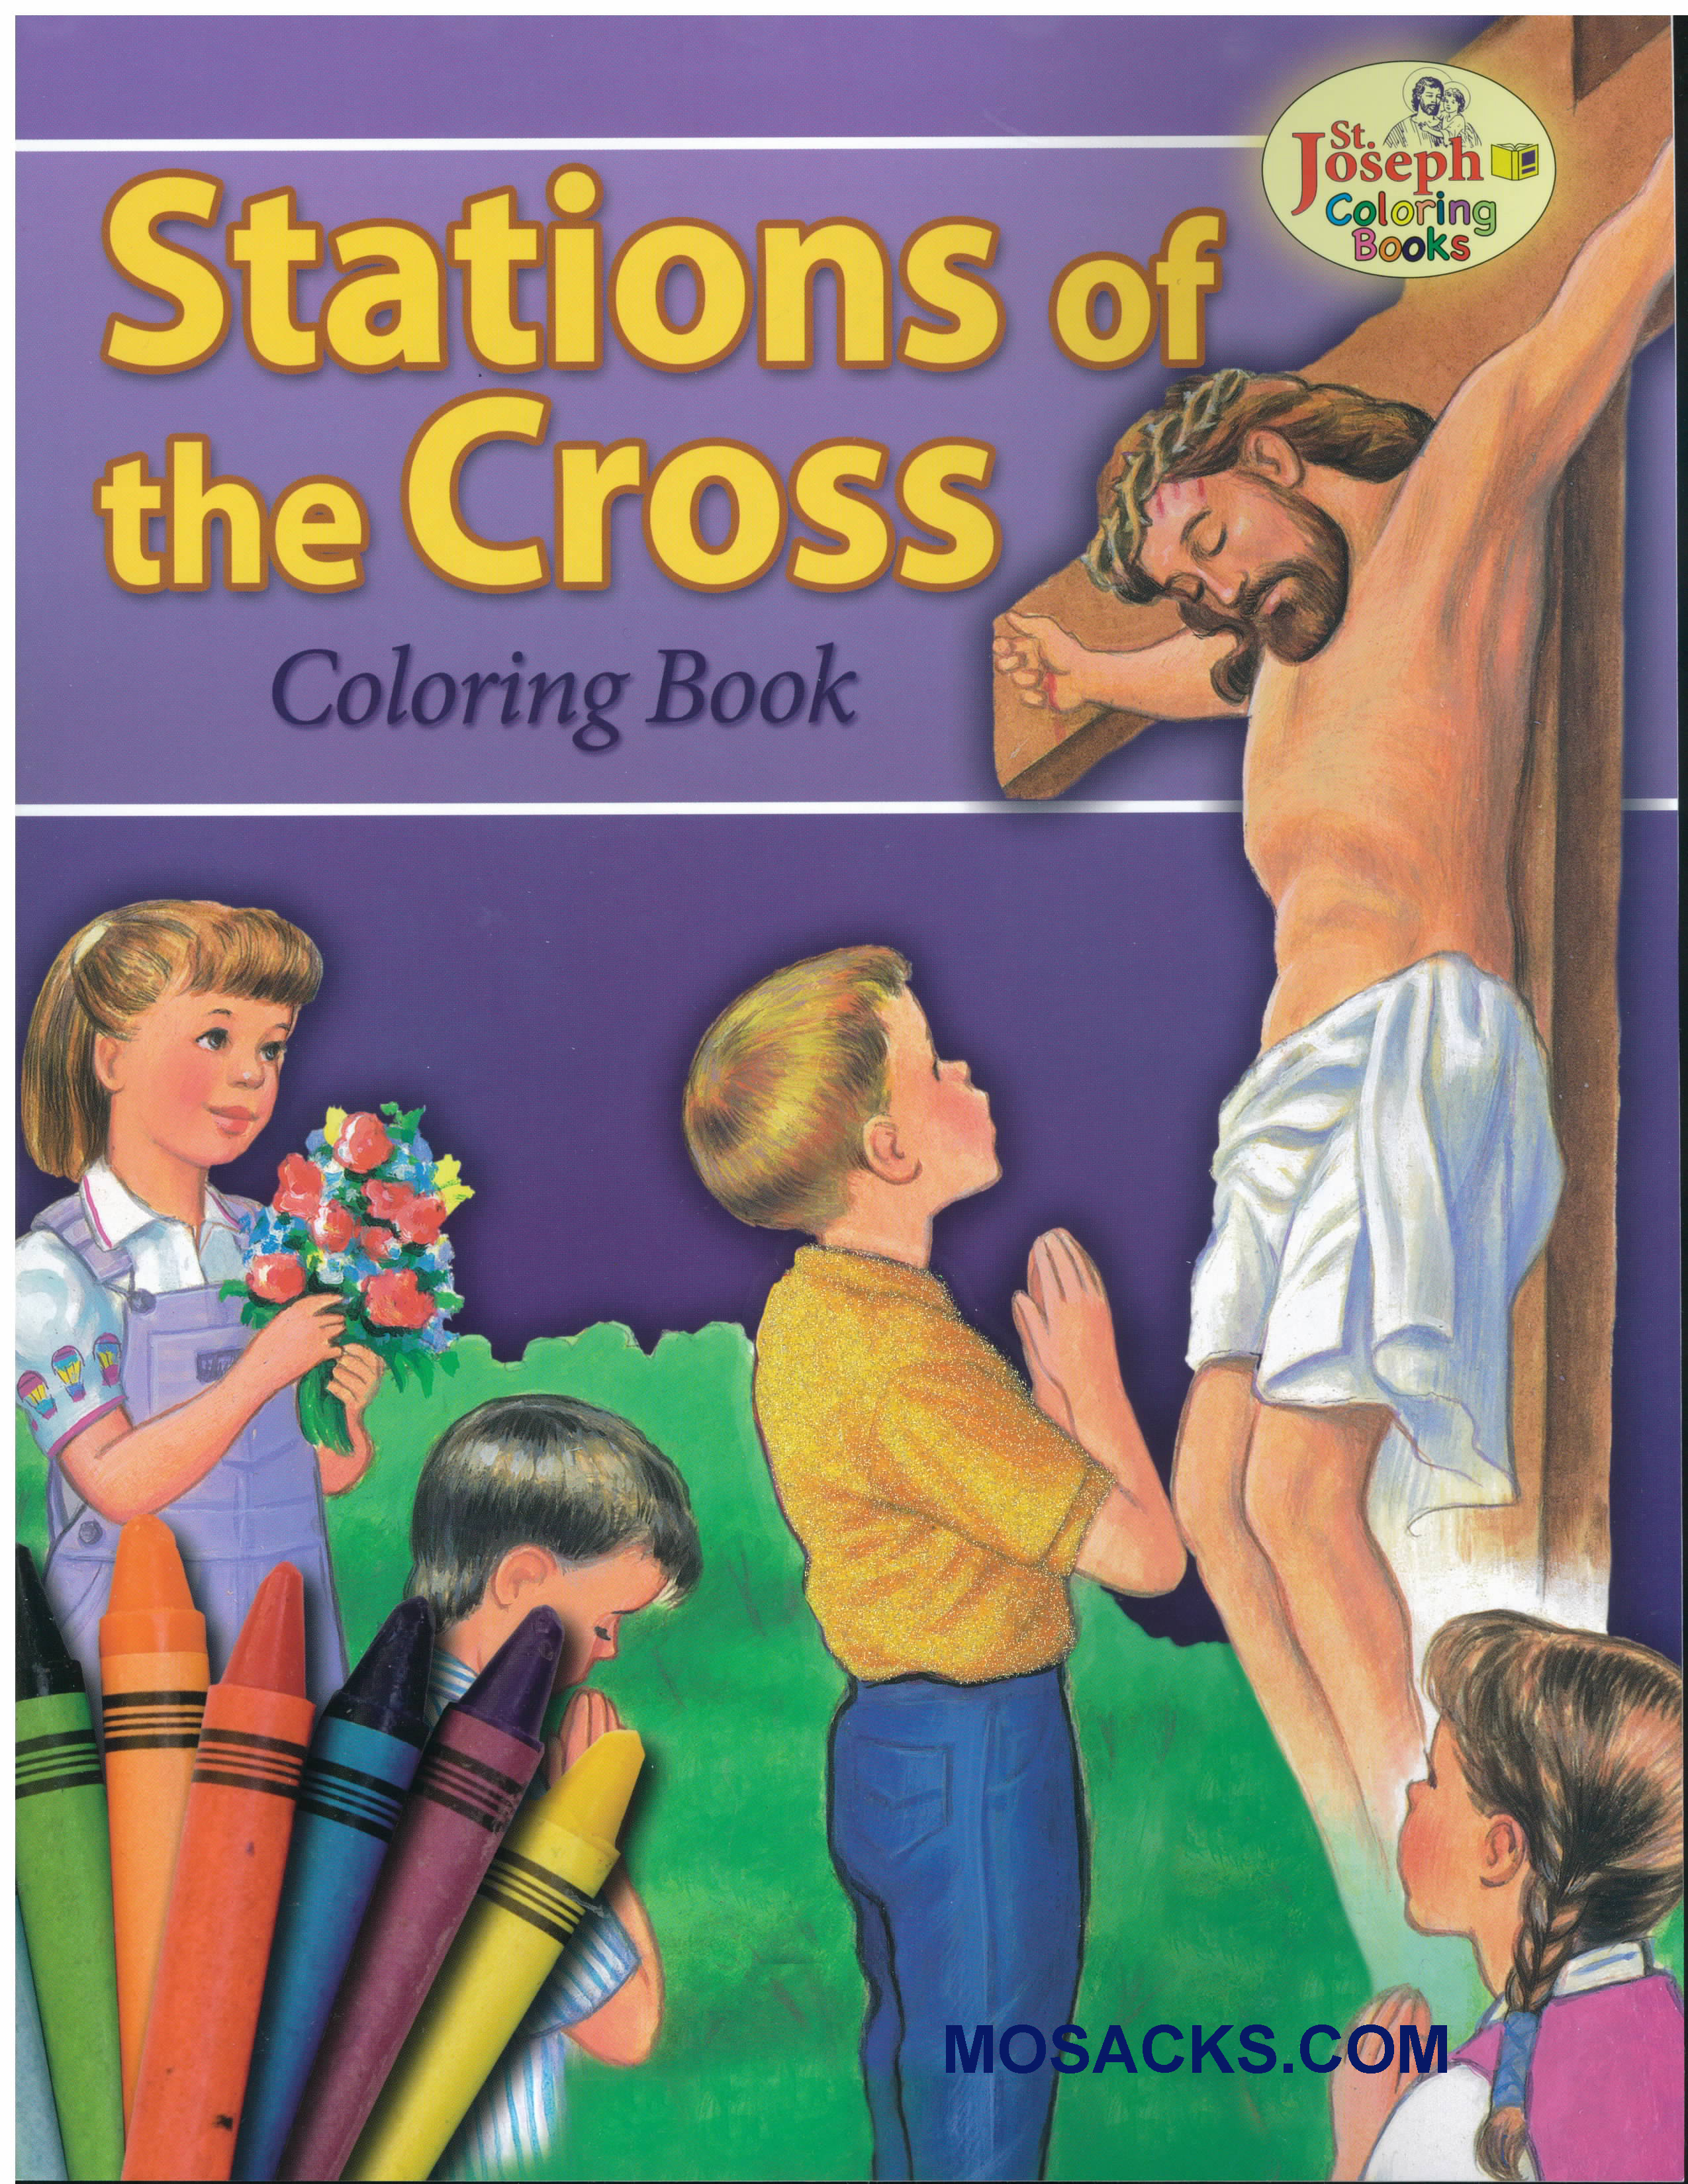 Coloring Book Stations Of The Cross-978089942689-1